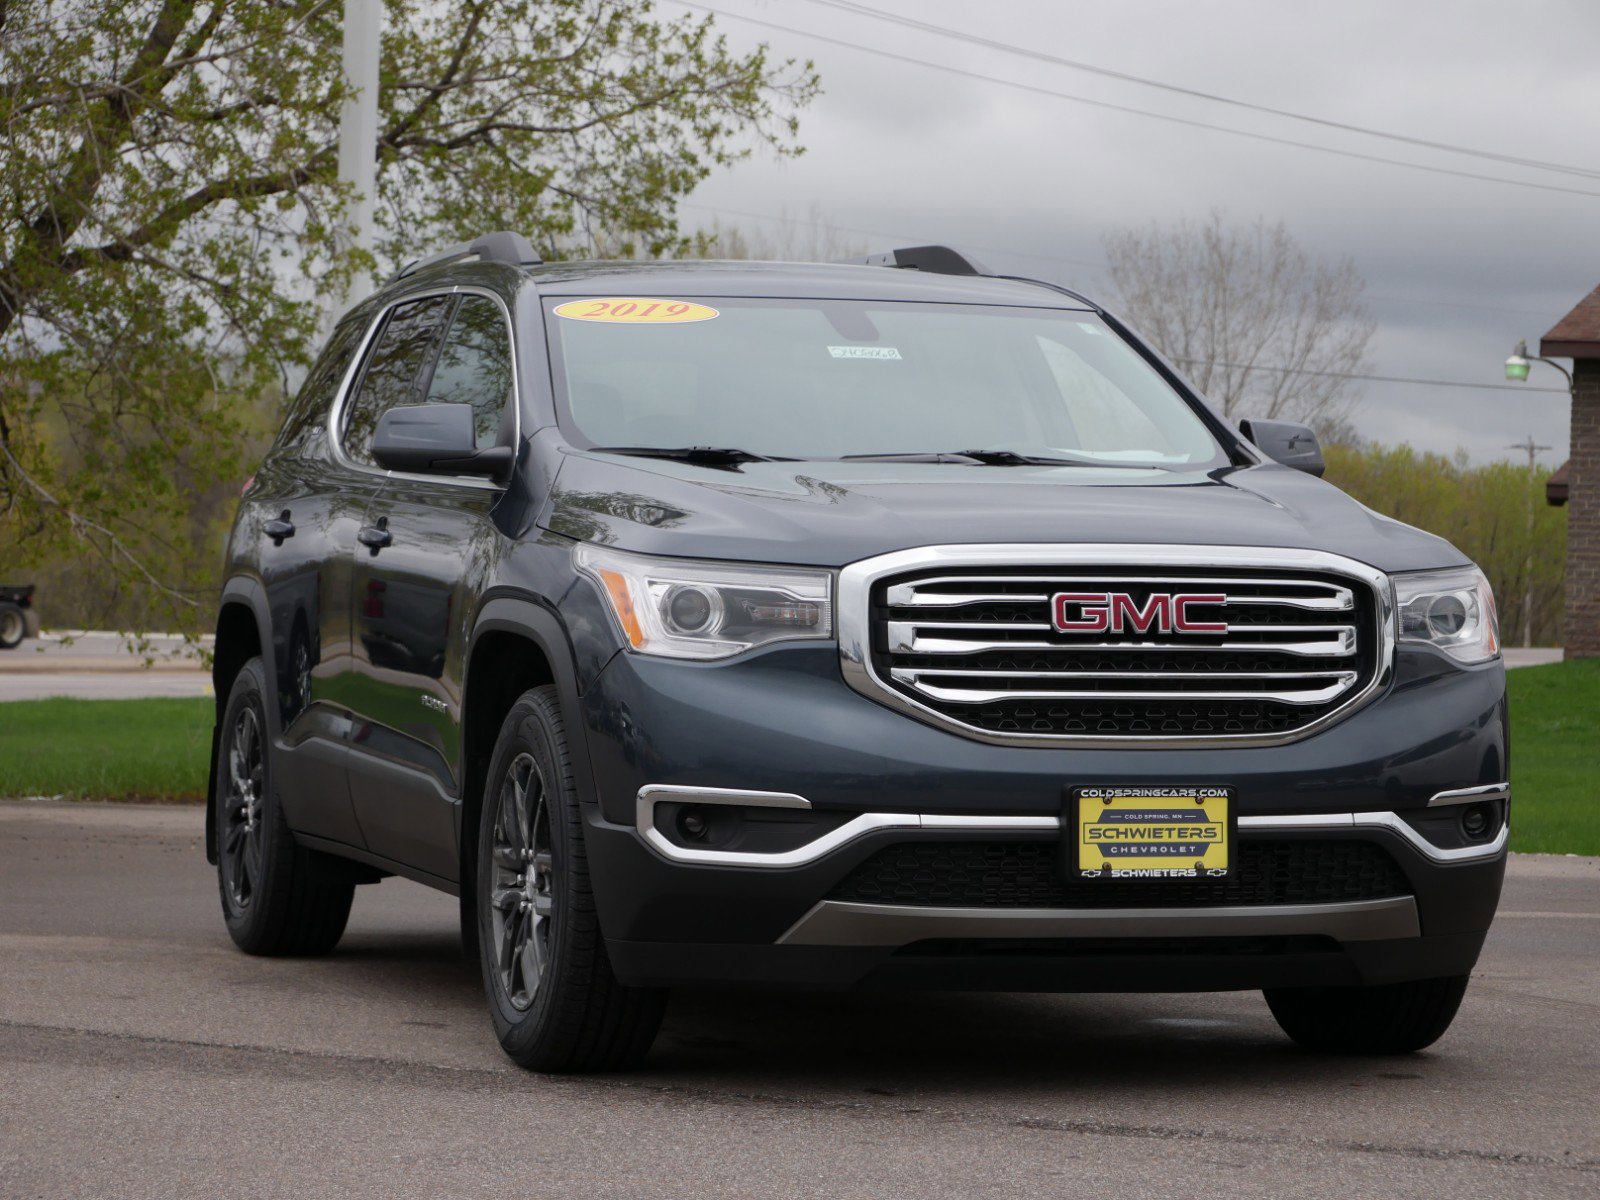 Used 2019 GMC Acadia SLT-1 with VIN 1GKKNULS0KZ156170 for sale in Cold Spring, Minnesota